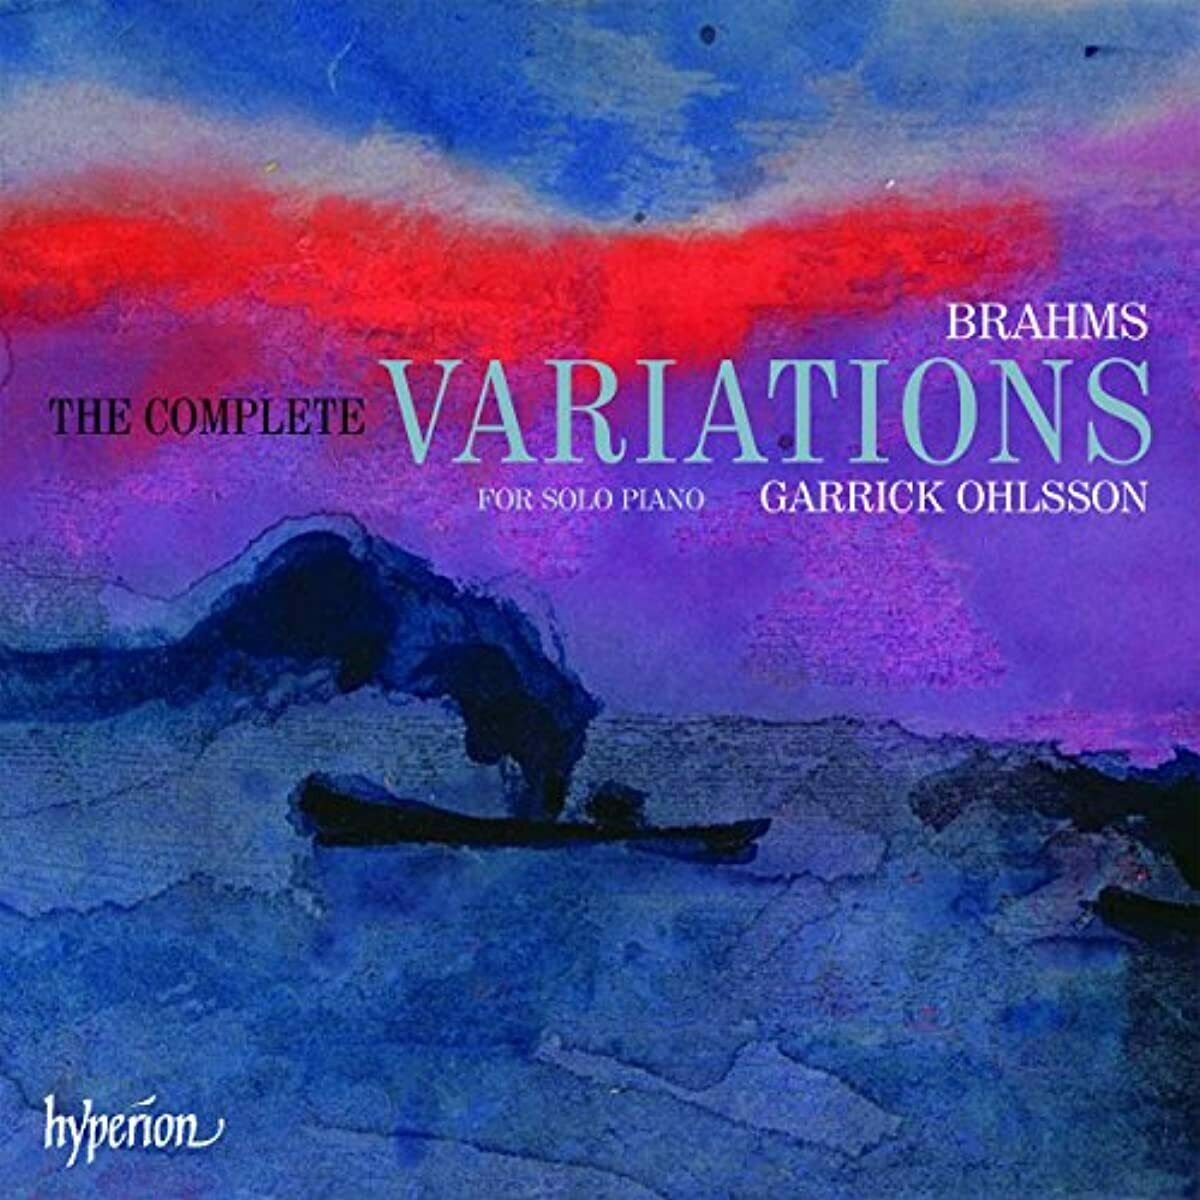 Brahms: Complete Variations for solo piano (Audio CD) Garrick Ohlsson